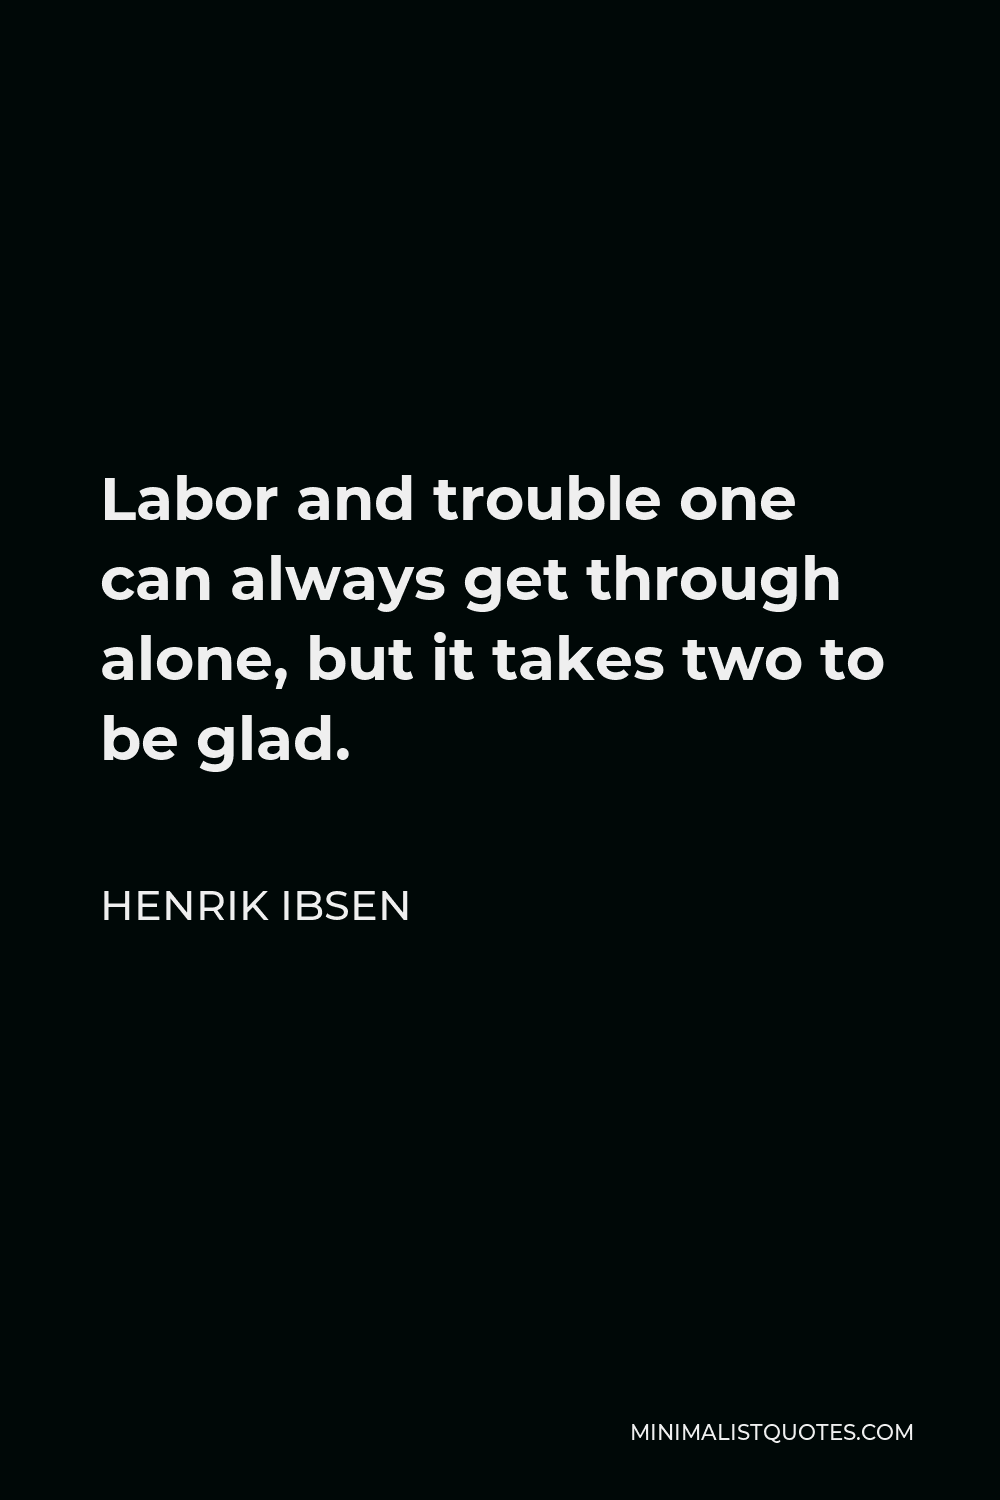 Henrik Ibsen Quote - Labor and trouble one can always get through alone, but it takes two to be glad.